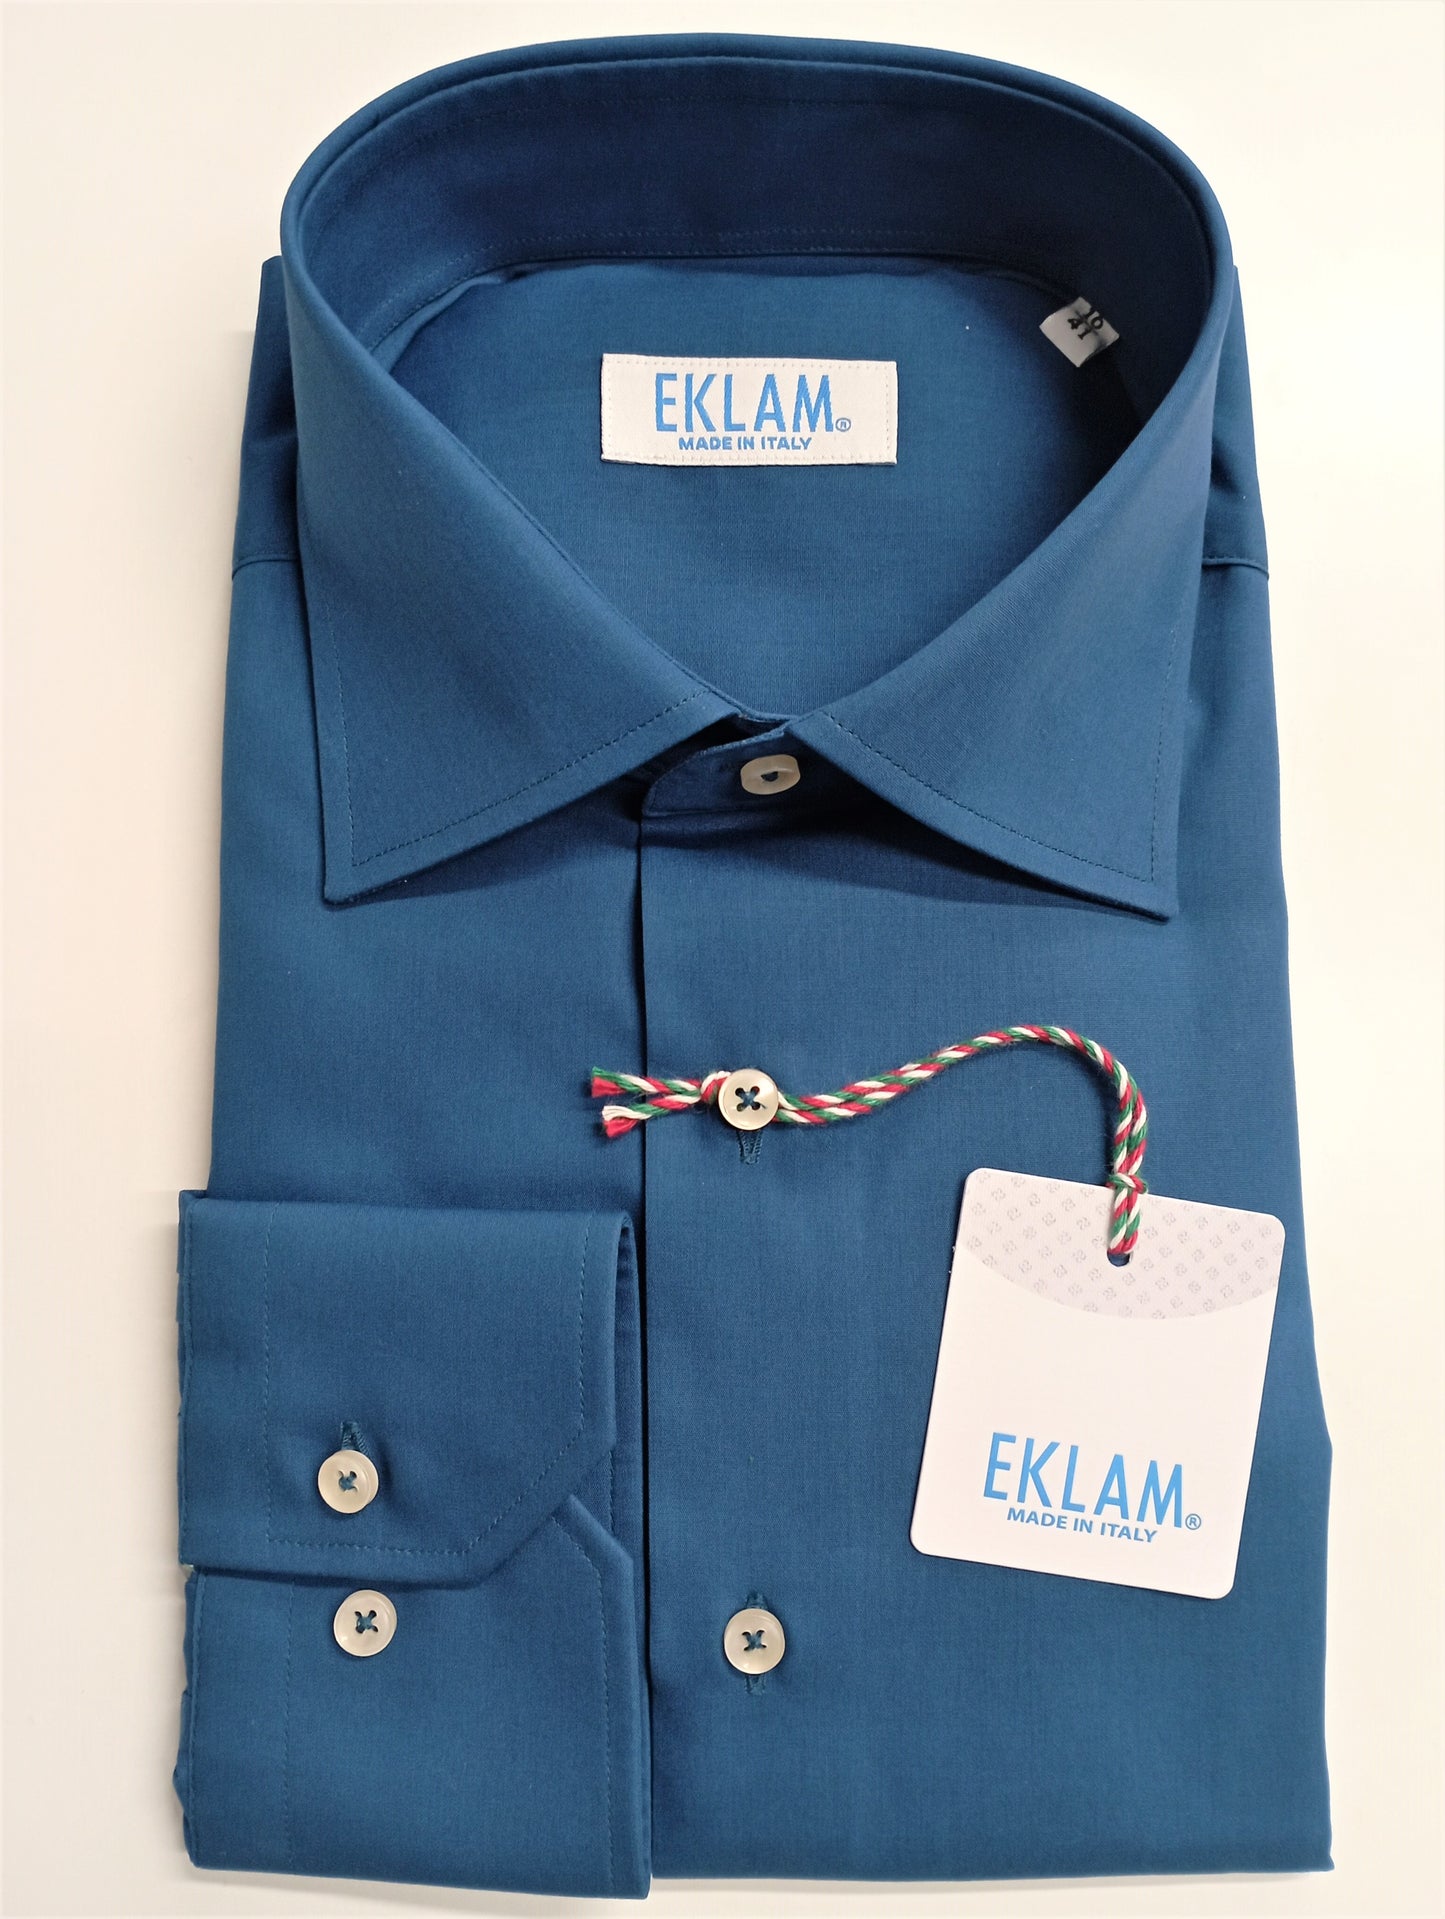 Solid color men's shirt with spread collar